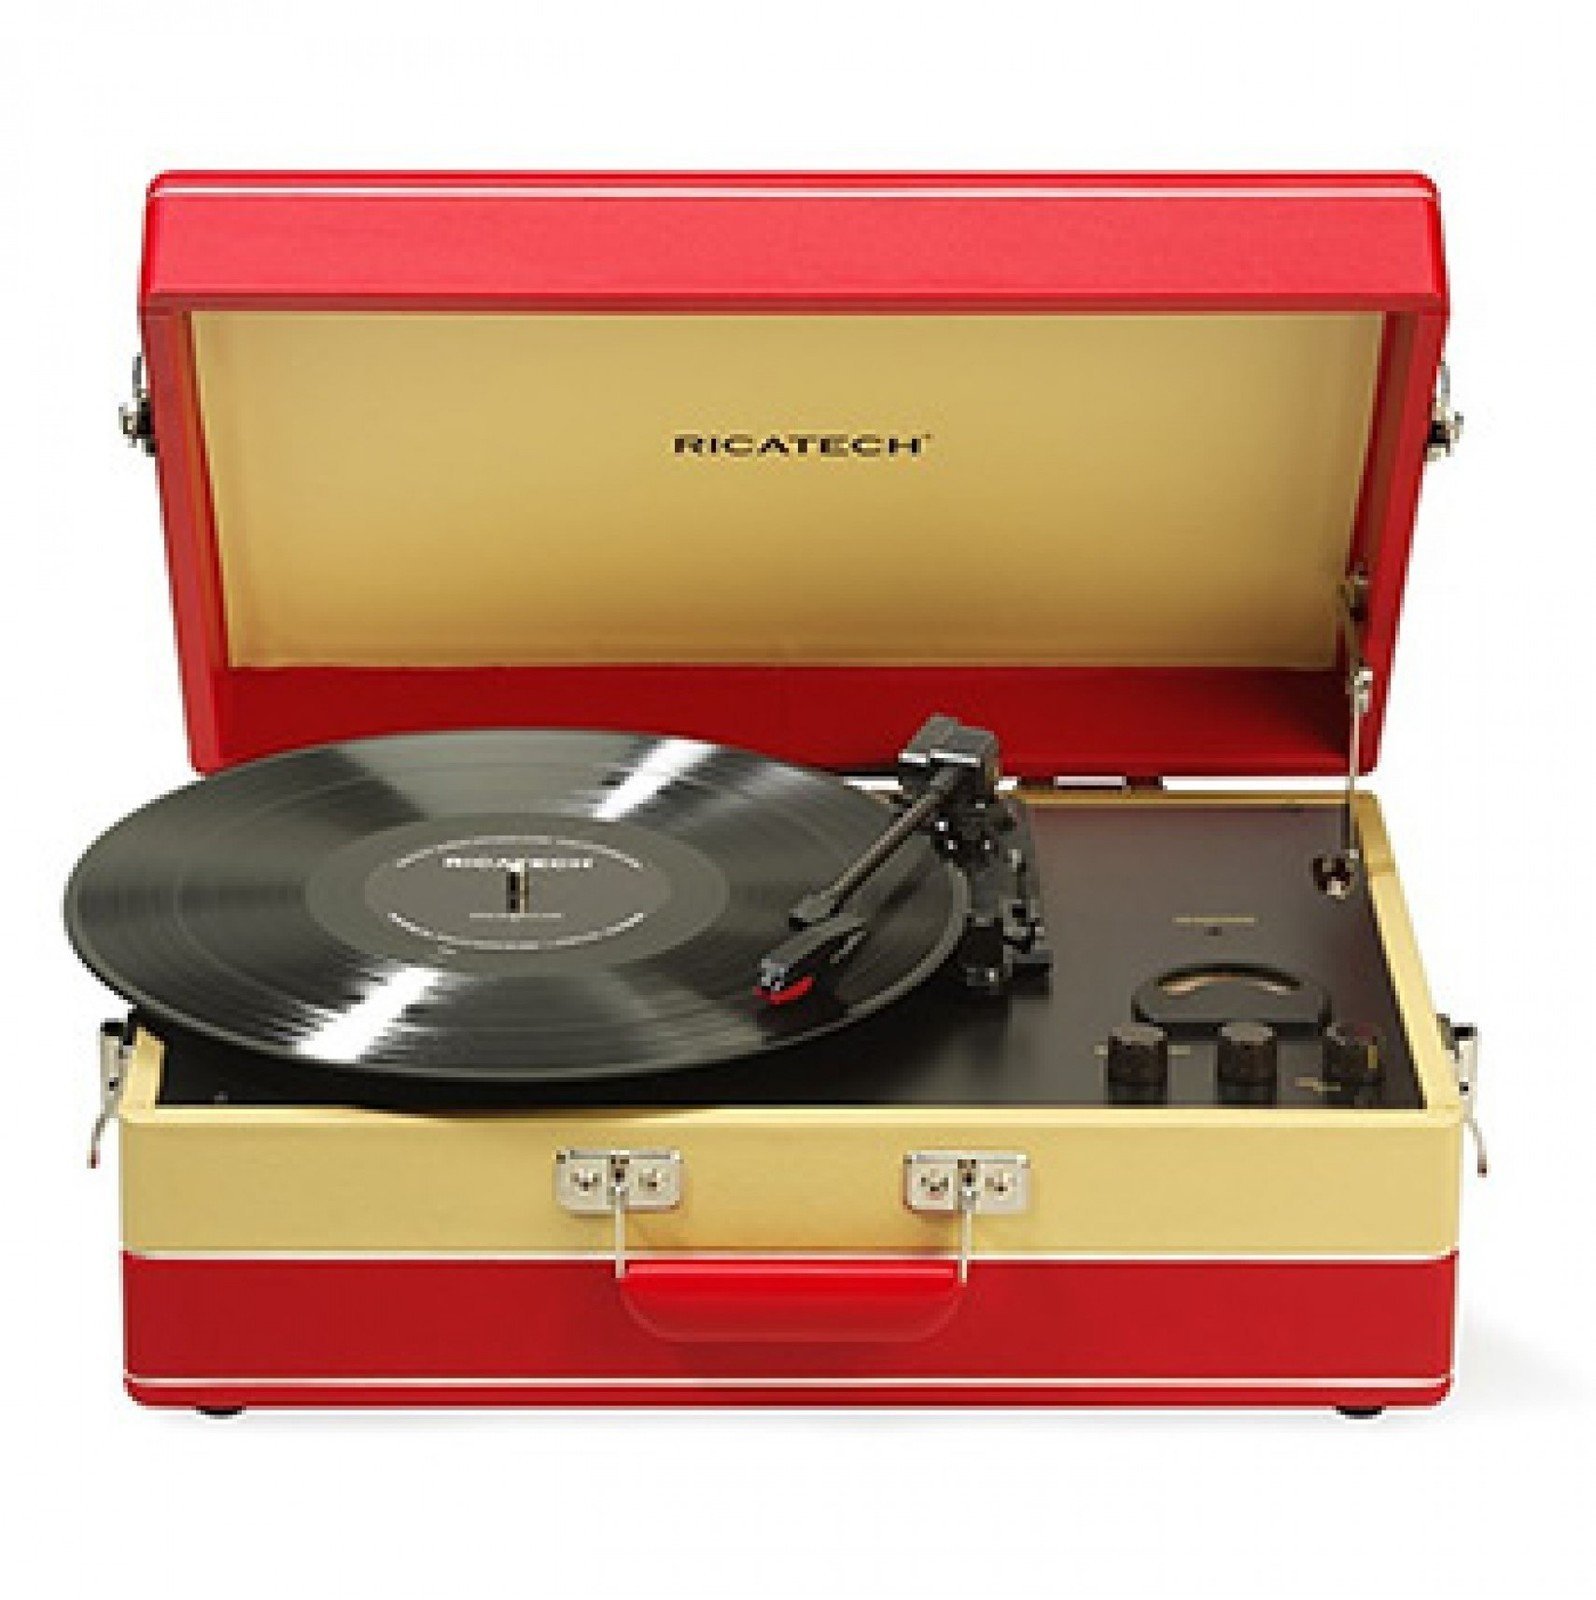 Tourne-disque portable Ricatech RTT95 Suitcase Turntable Red